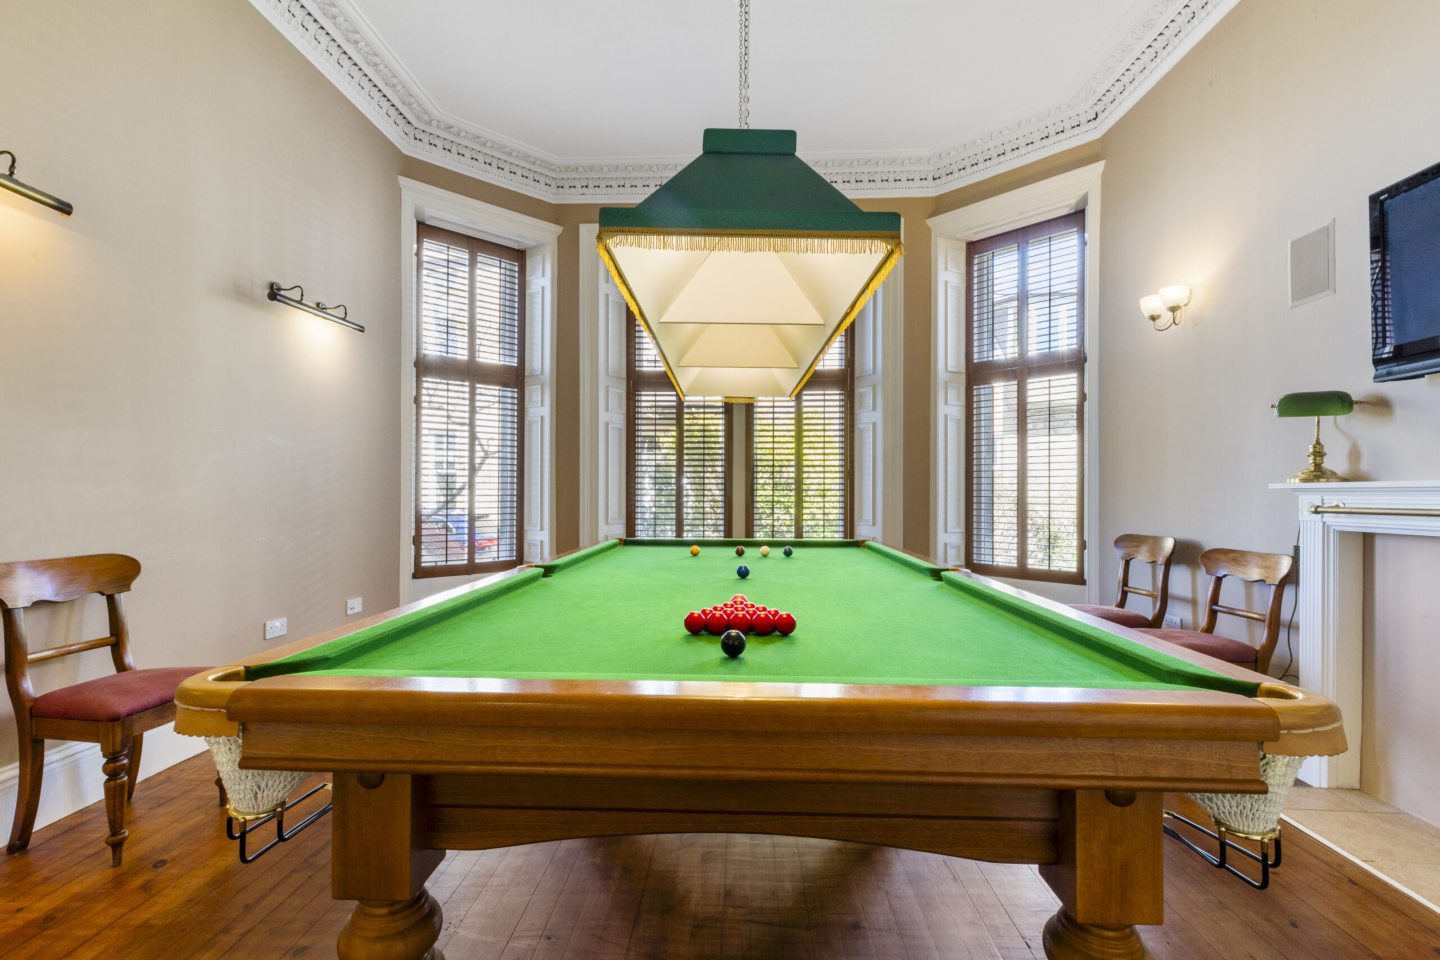 A snooker table in one of the rooms.